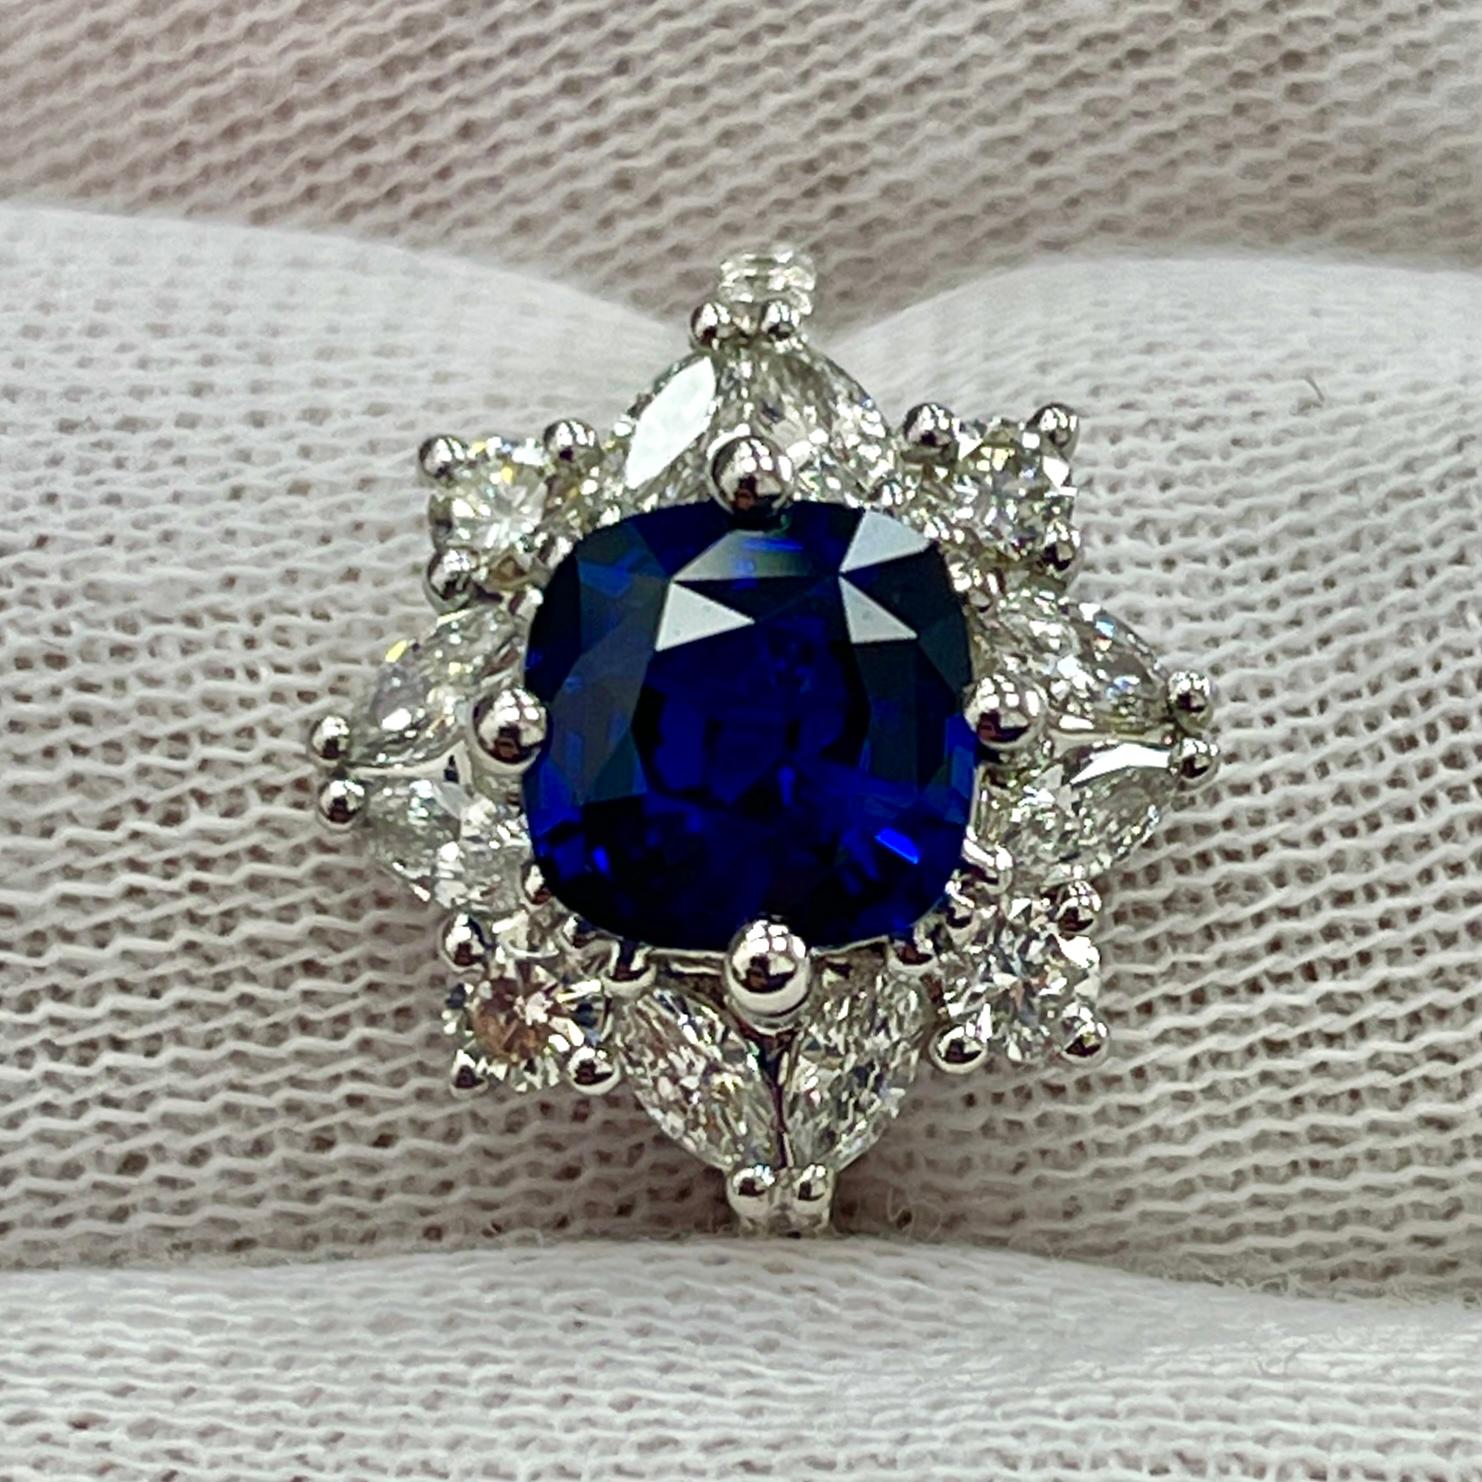 This is a STUNNING sapphire with a very deep color, mounted in an elegant 18K white gold and diamond ring with 0.67Ct of brilliant white diamonds. Suitable for any occasion!